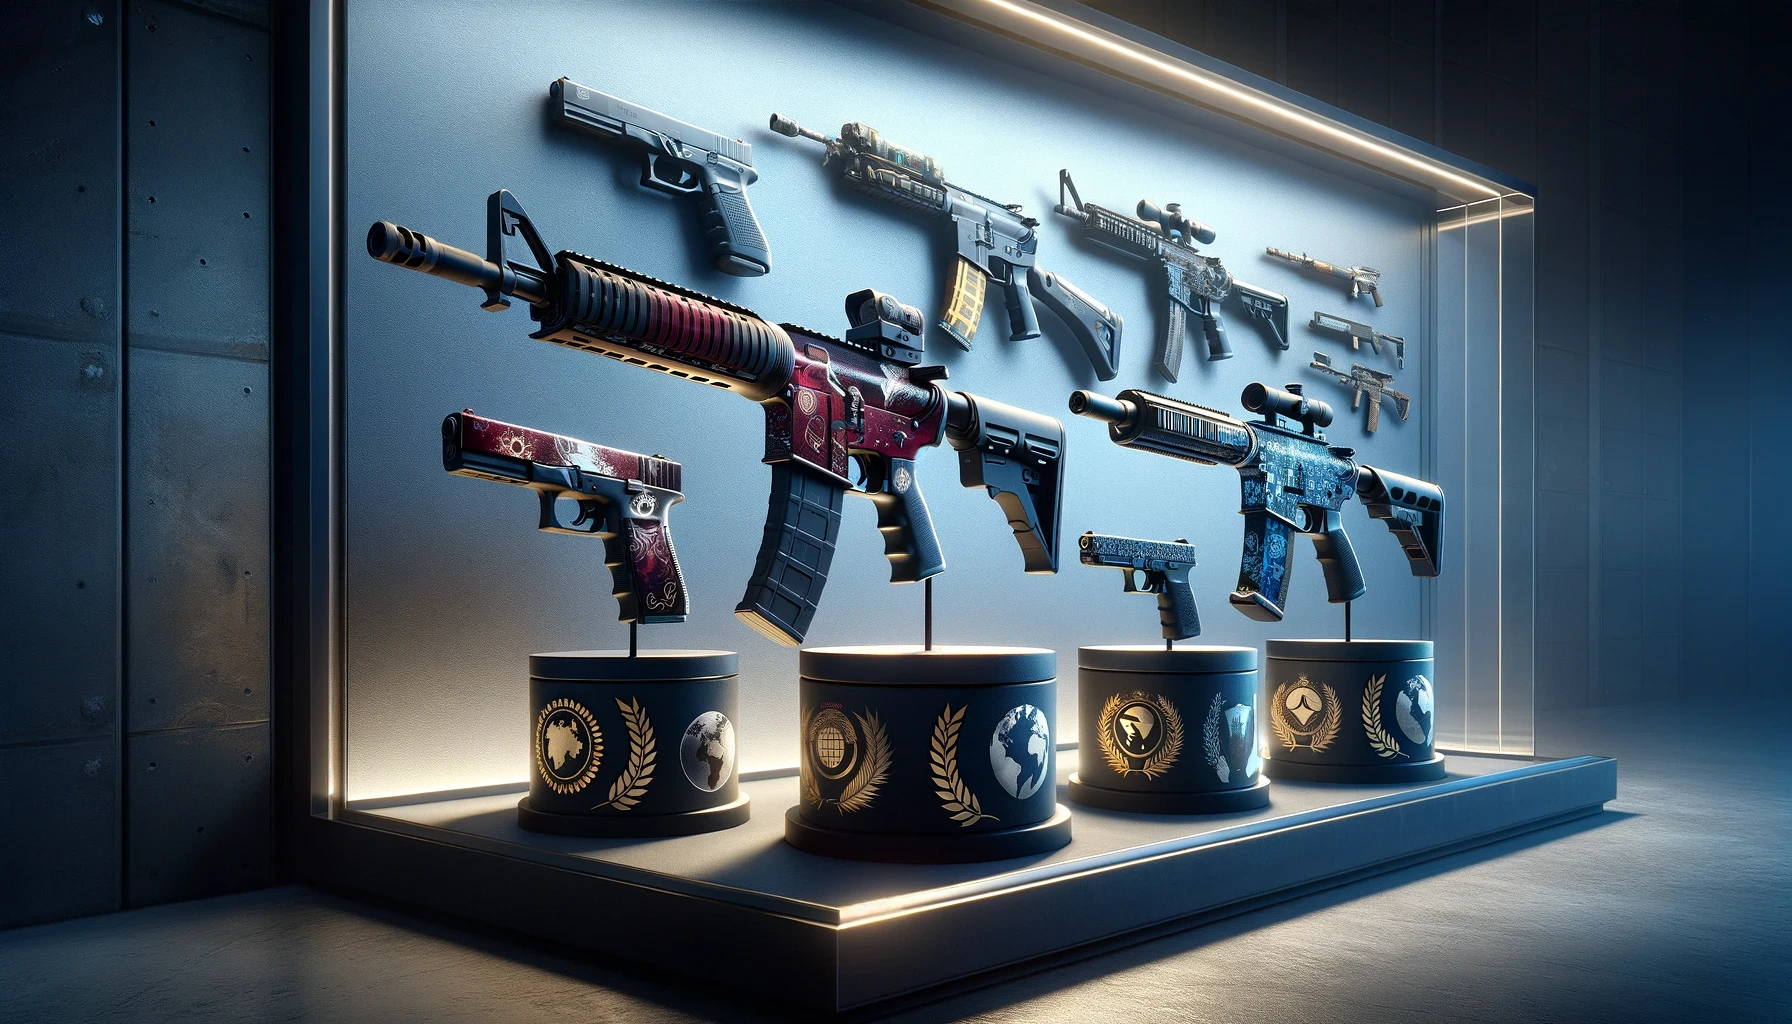 Illustration of a visually striking collection of fictional gun skins, drawing inspiration from Counter-Strike's tactical and competitive elements.